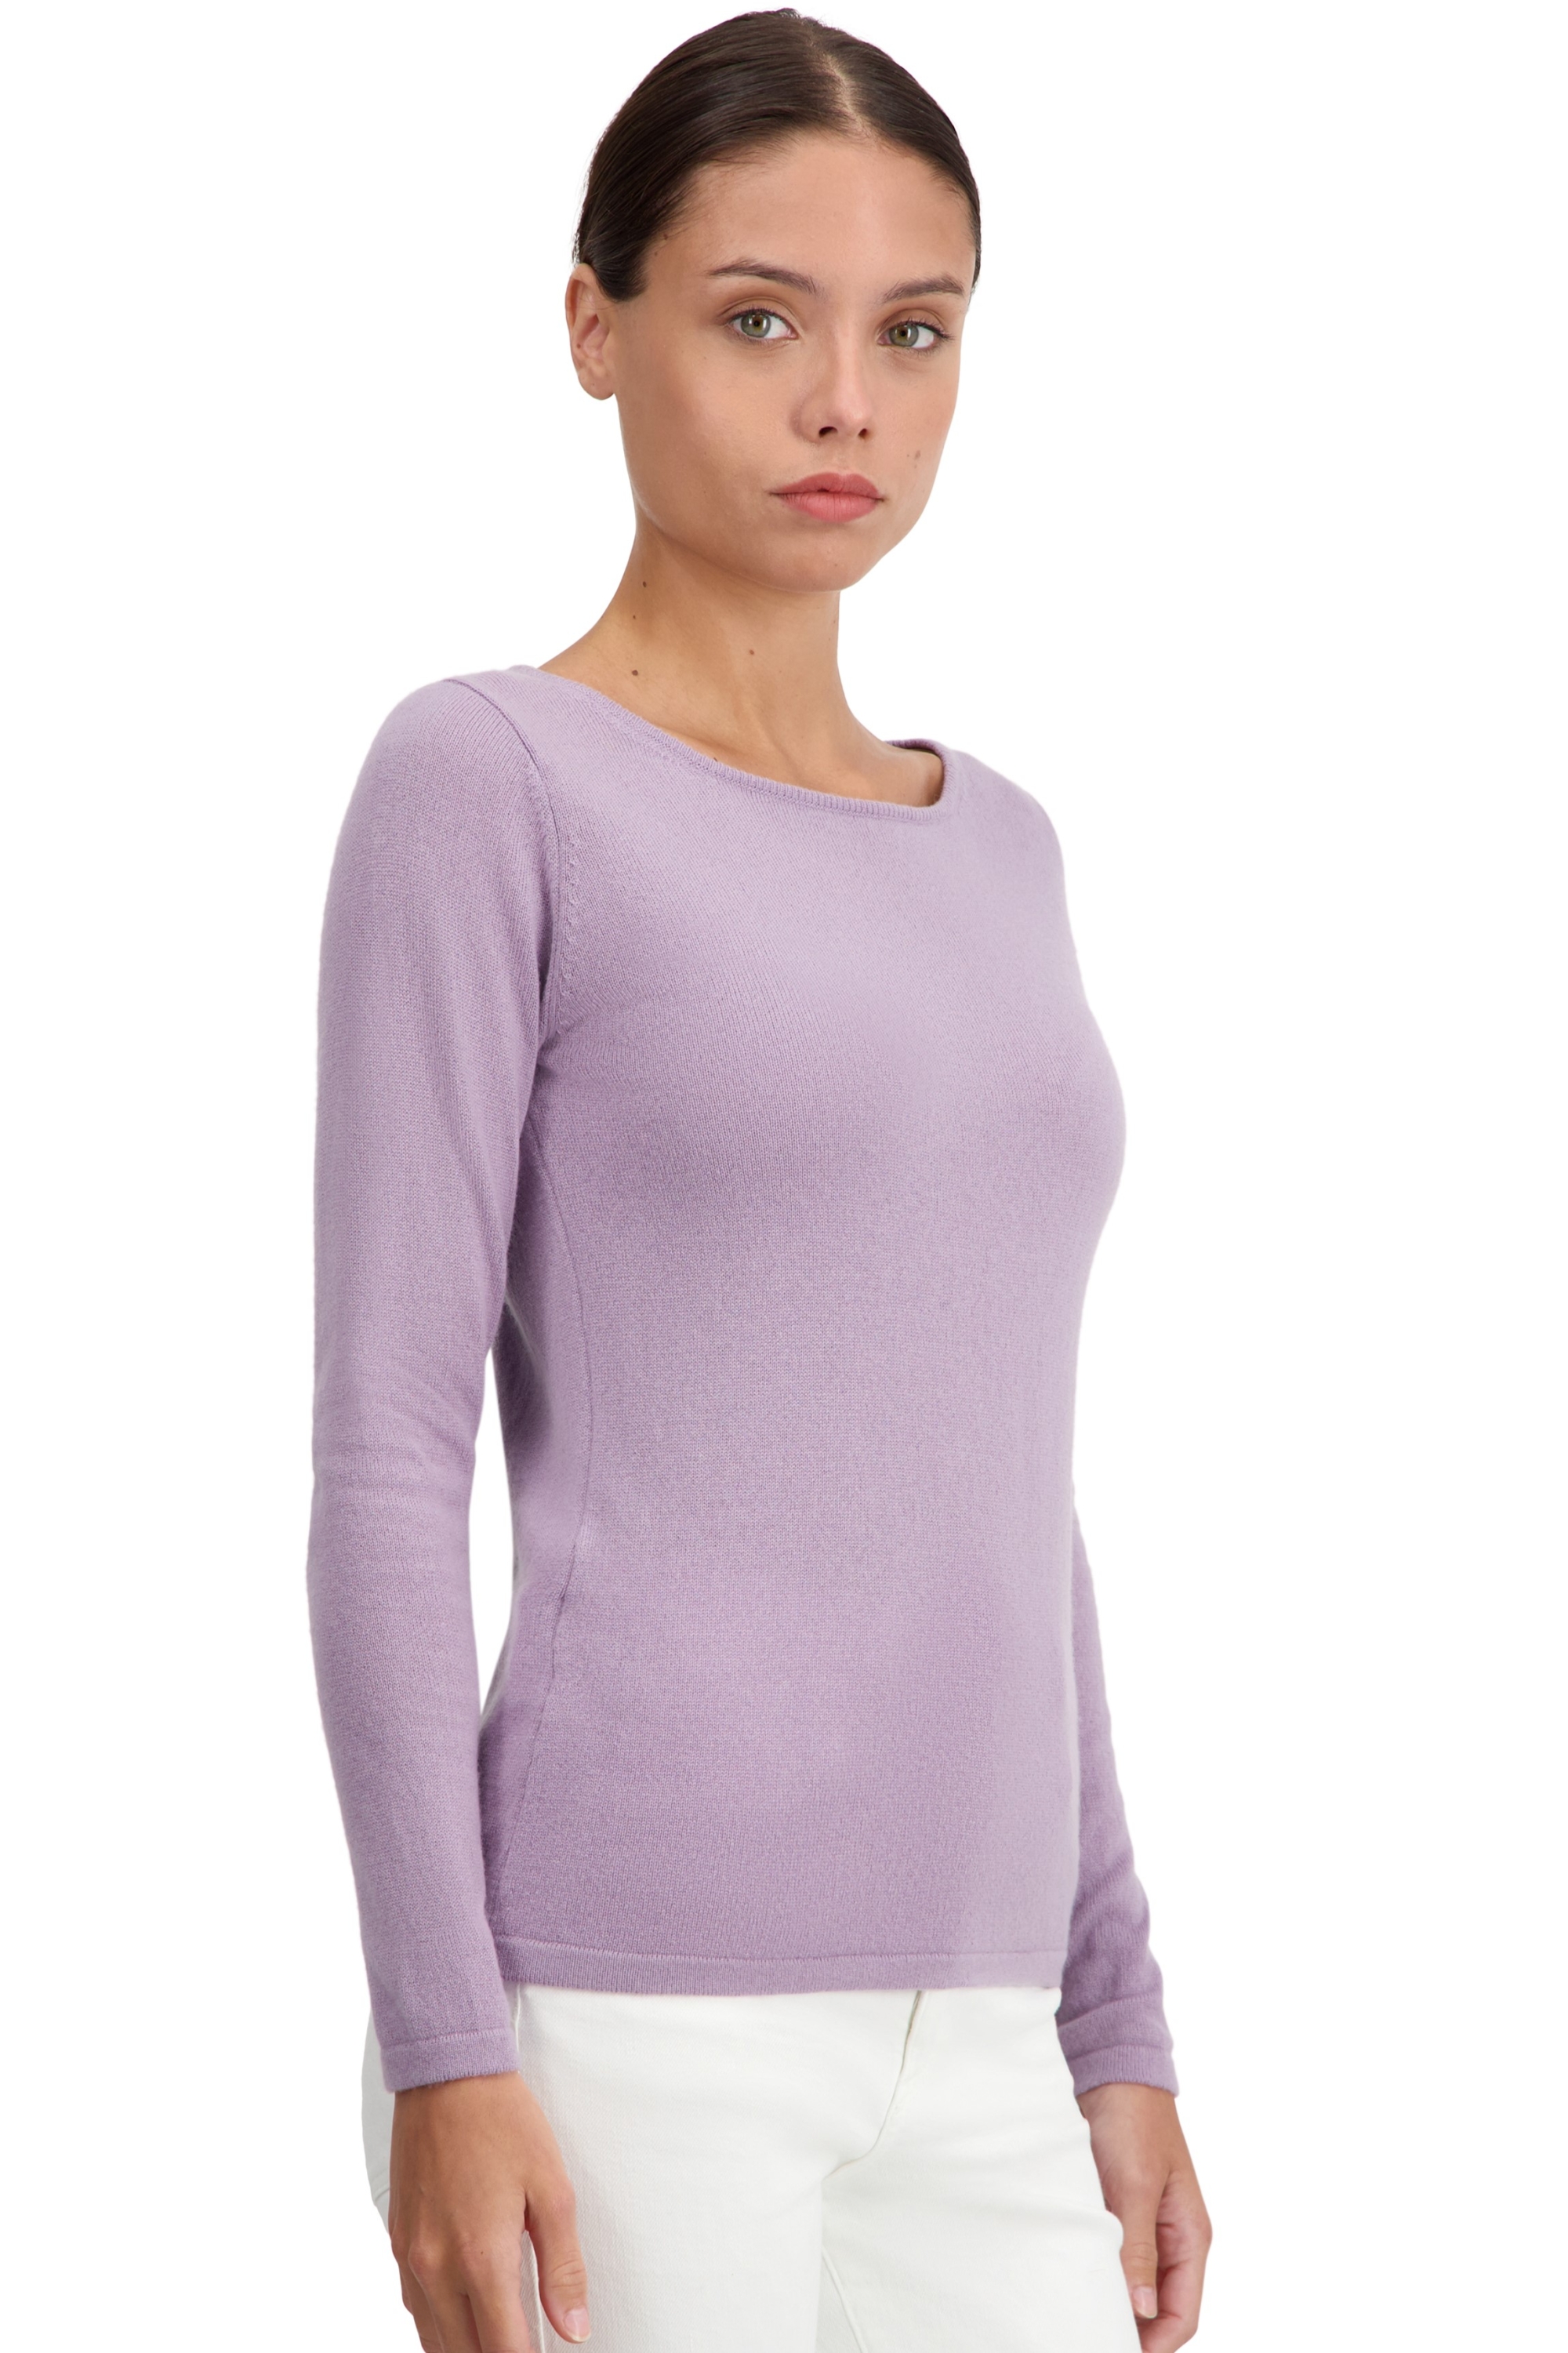 Cashmere ladies tennessy first vintage l